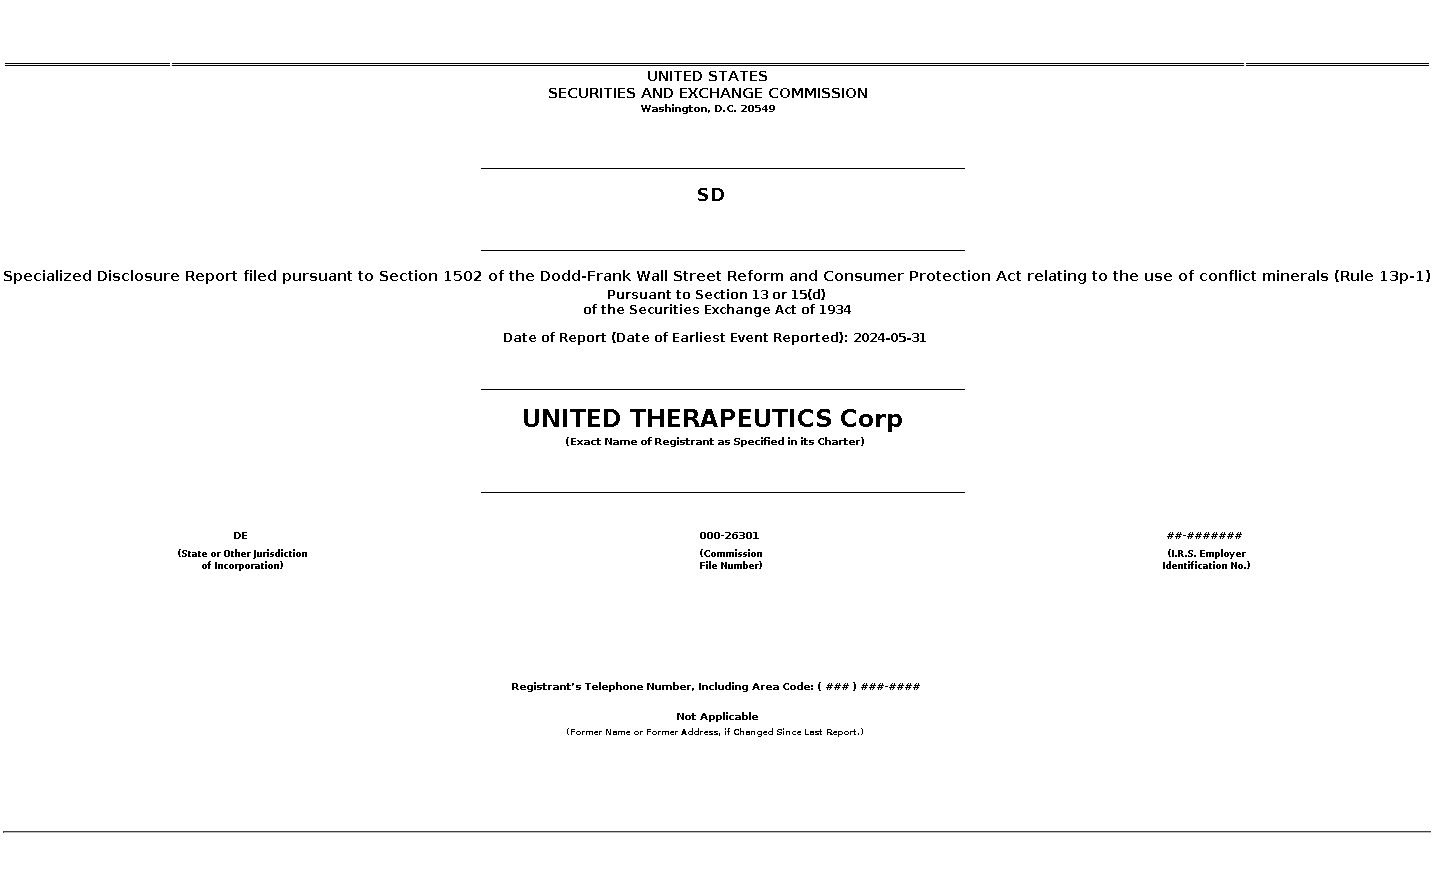 UTHR : SD Specialized Disclosure Report filed pursuant to Section 1502 of the Dodd-Frank Wall Street Reform and Consumer Protection Act relating to the use of conflict minerals (Rule 13p-1)